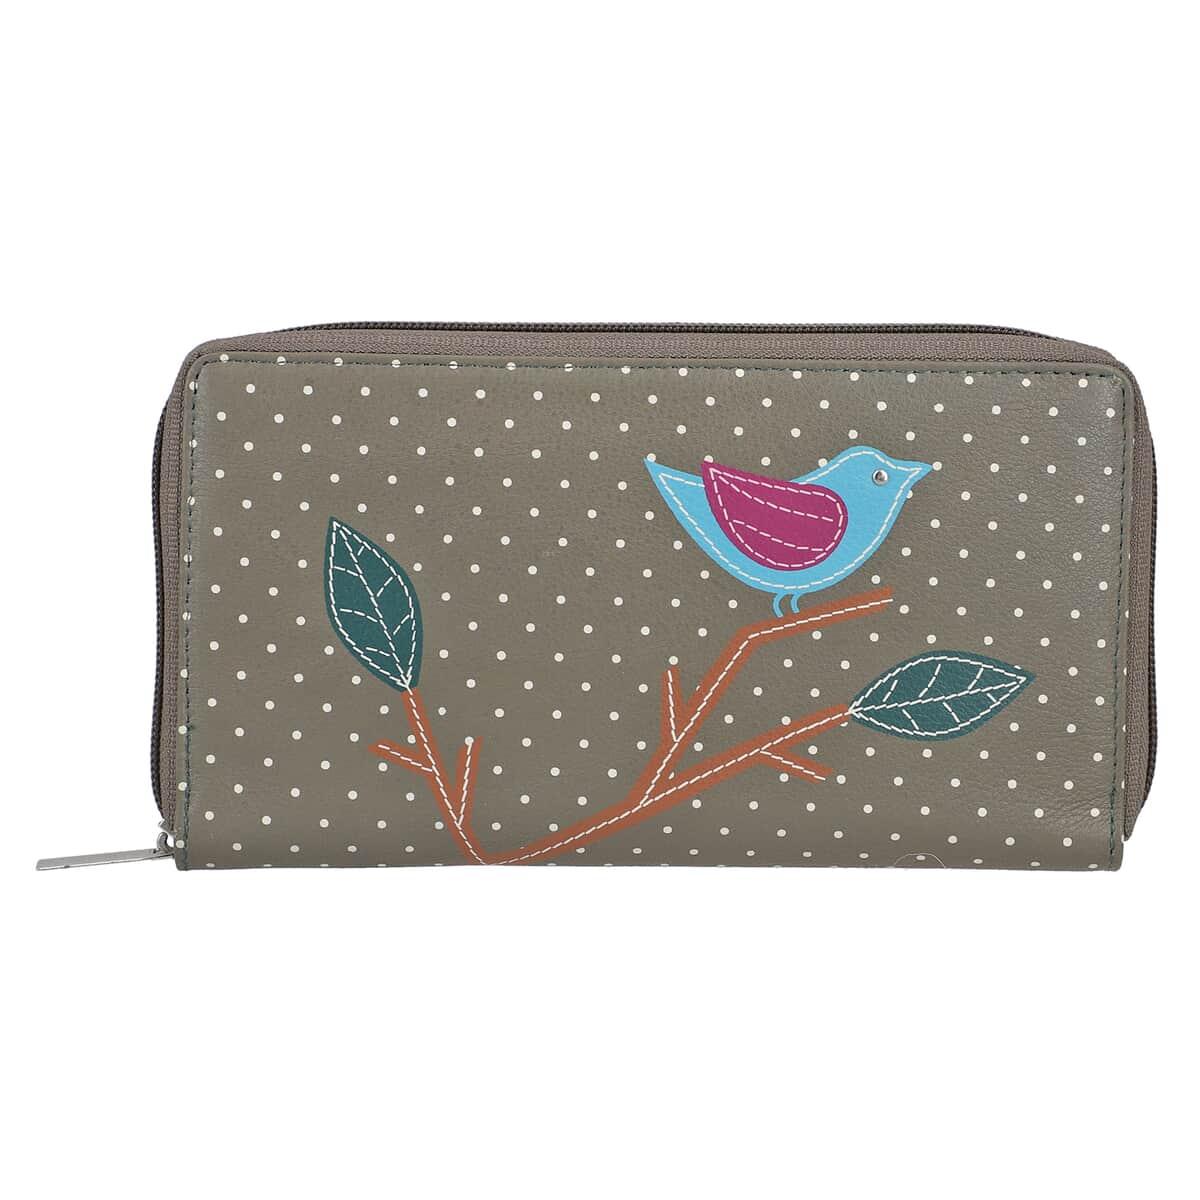 Union Code Gray Color Bird Sitting on Tree Pattern RFID Protected 100% Genuine Leather Applique Women's Wallet image number 0